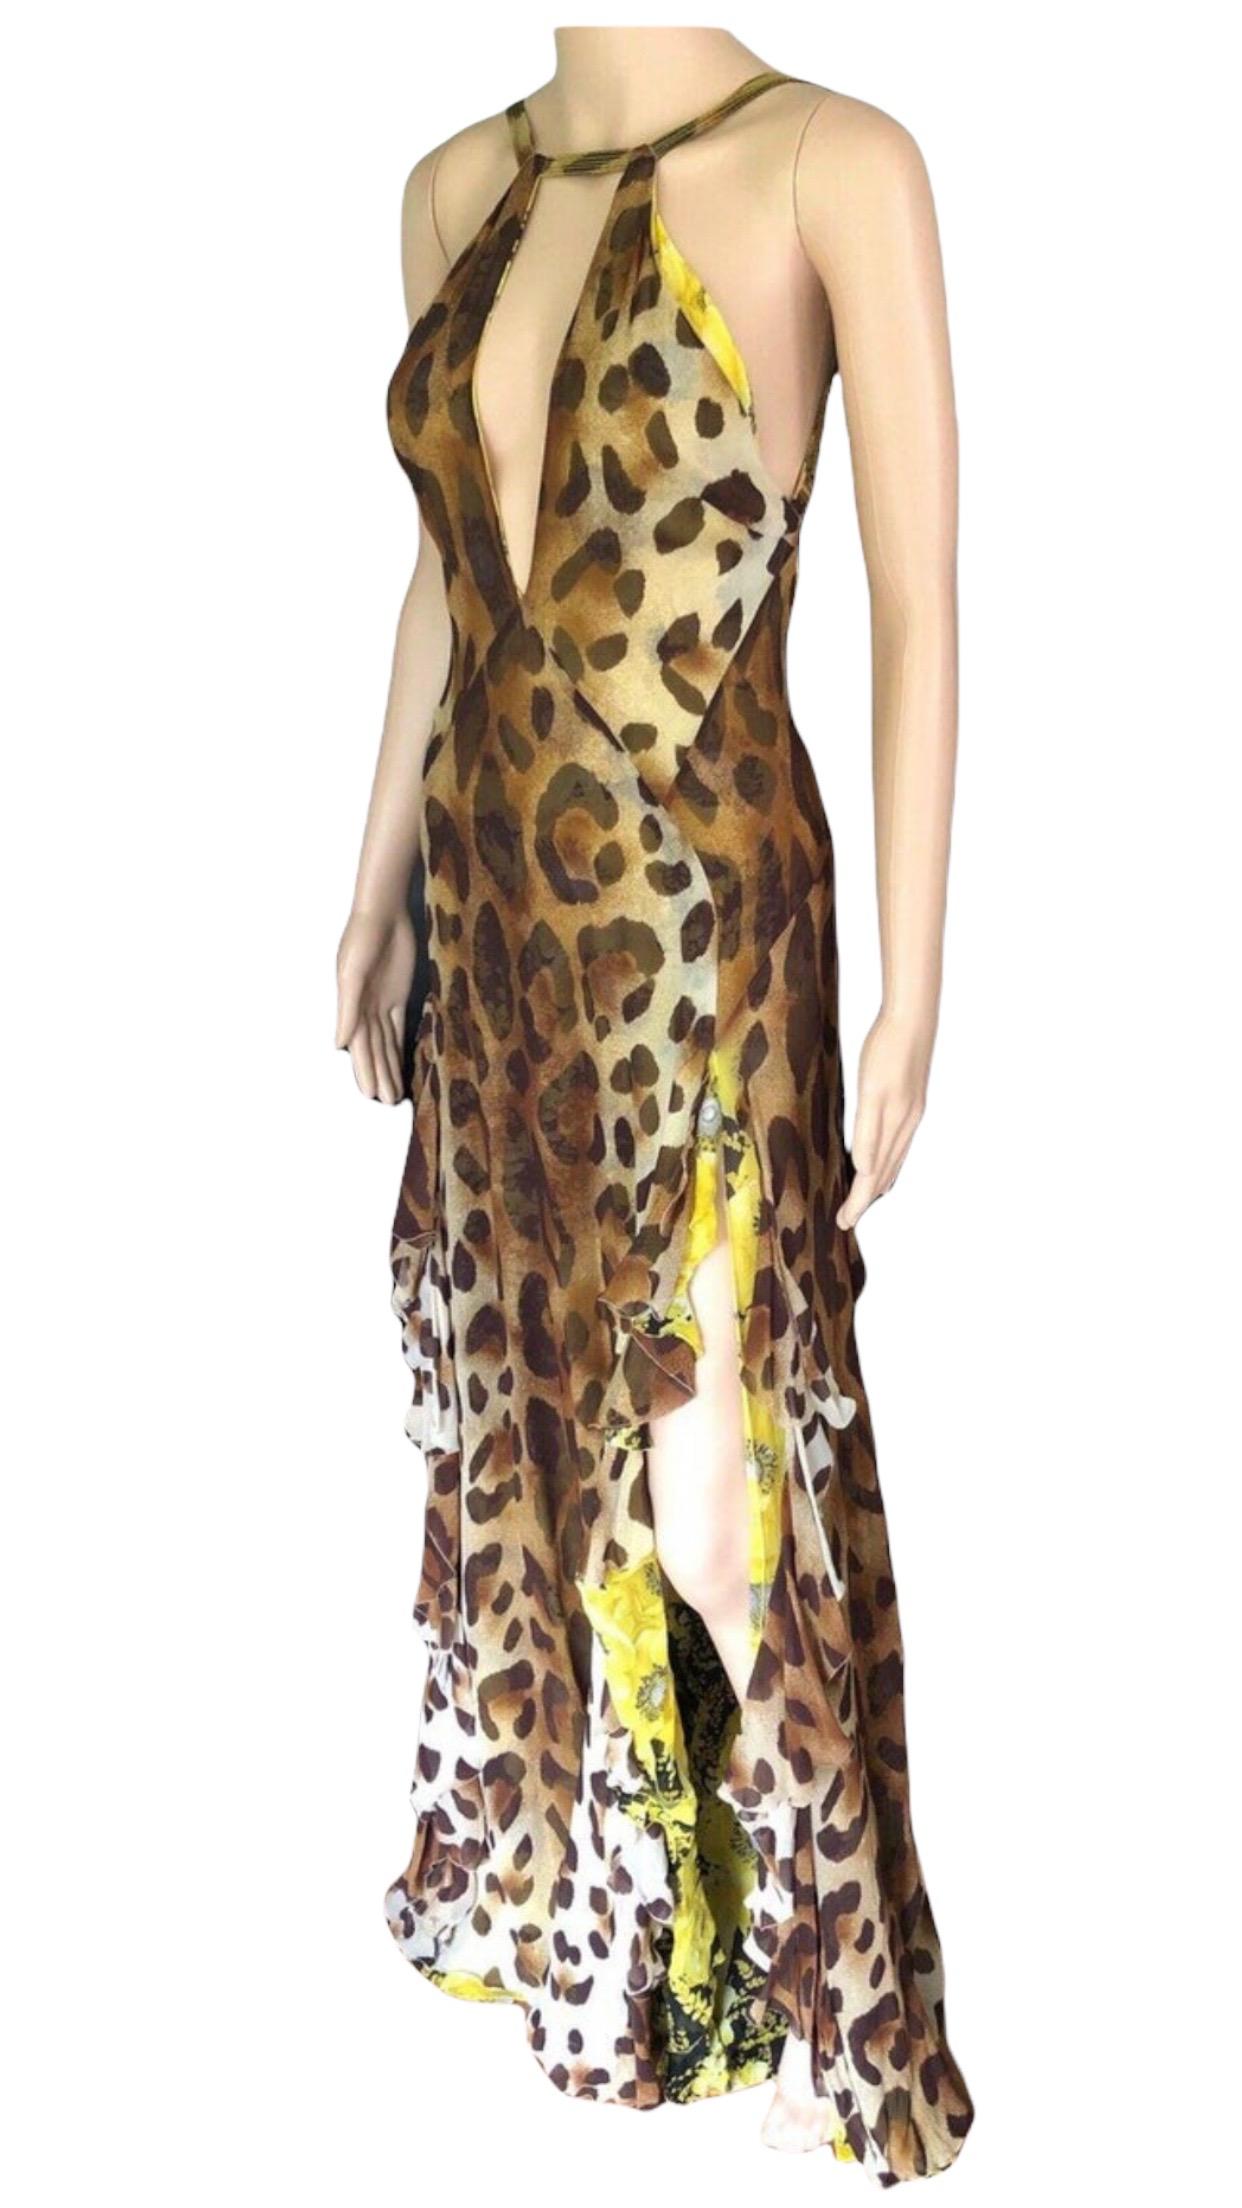 Gianni Versace S/S 2002 Vintage Plunged Backless Dress Gown For Sale 2